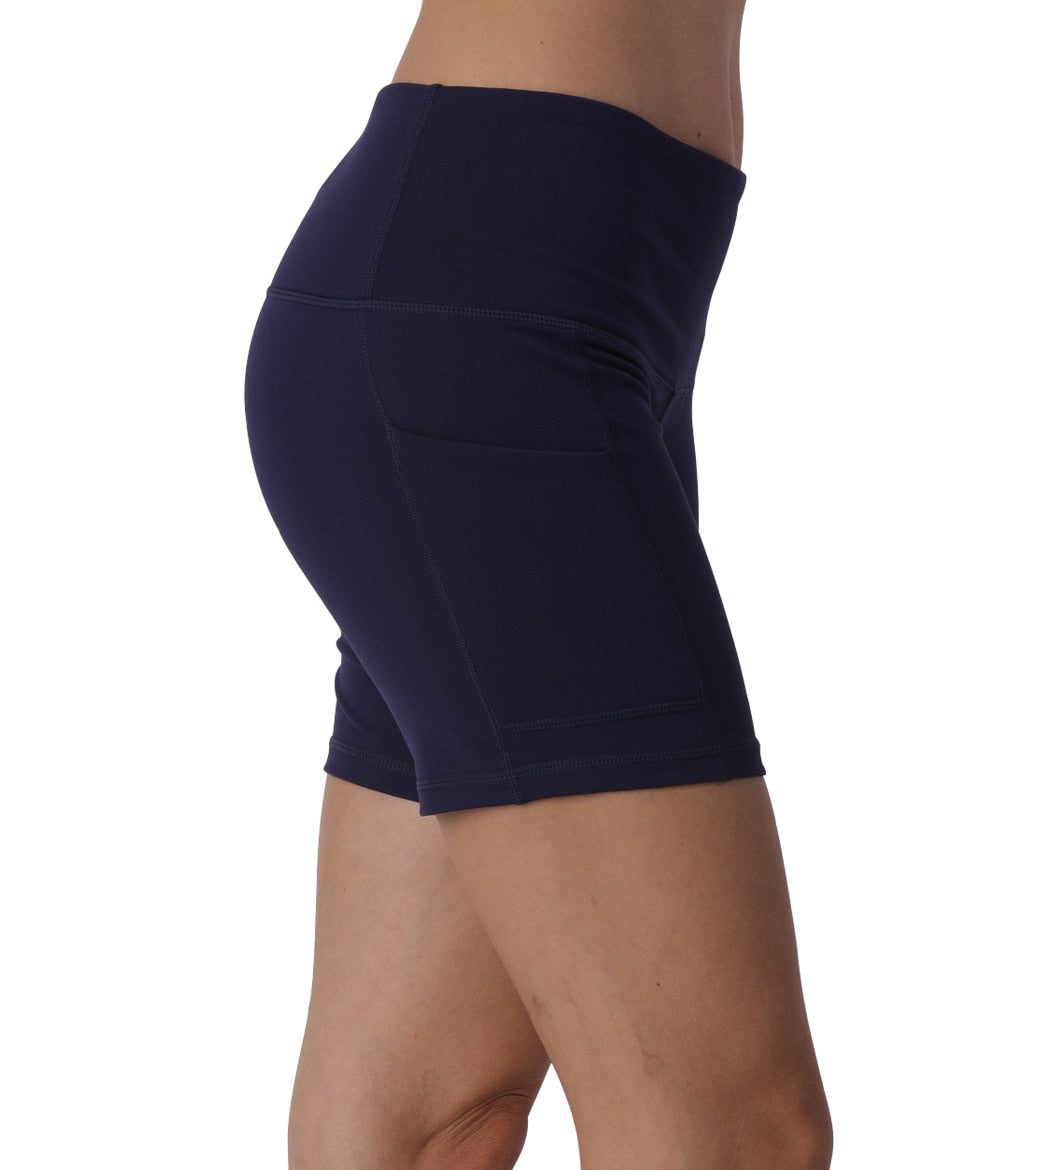 LOVESOFT Women's Workout Sports Yoga Shorts with Side Pocketed